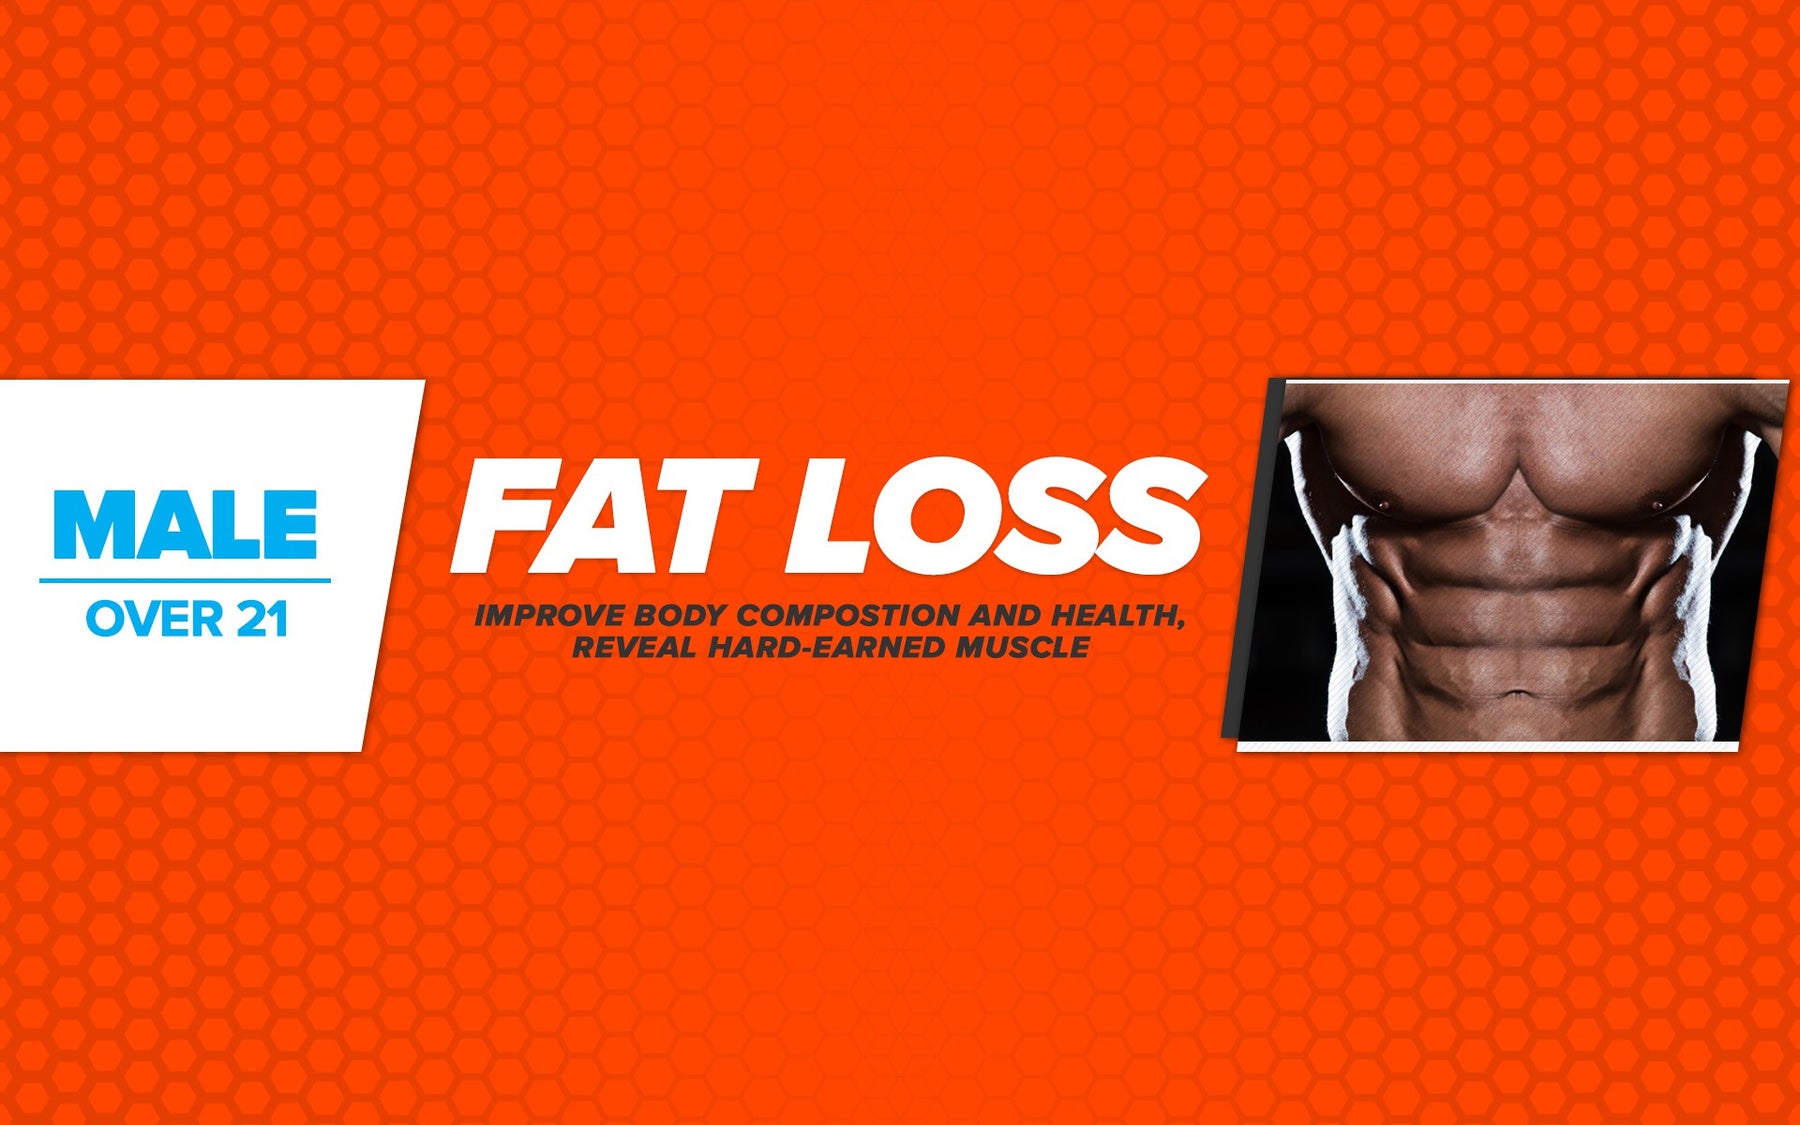 Free Workout Plan - Male - Over 21 - Fat Loss